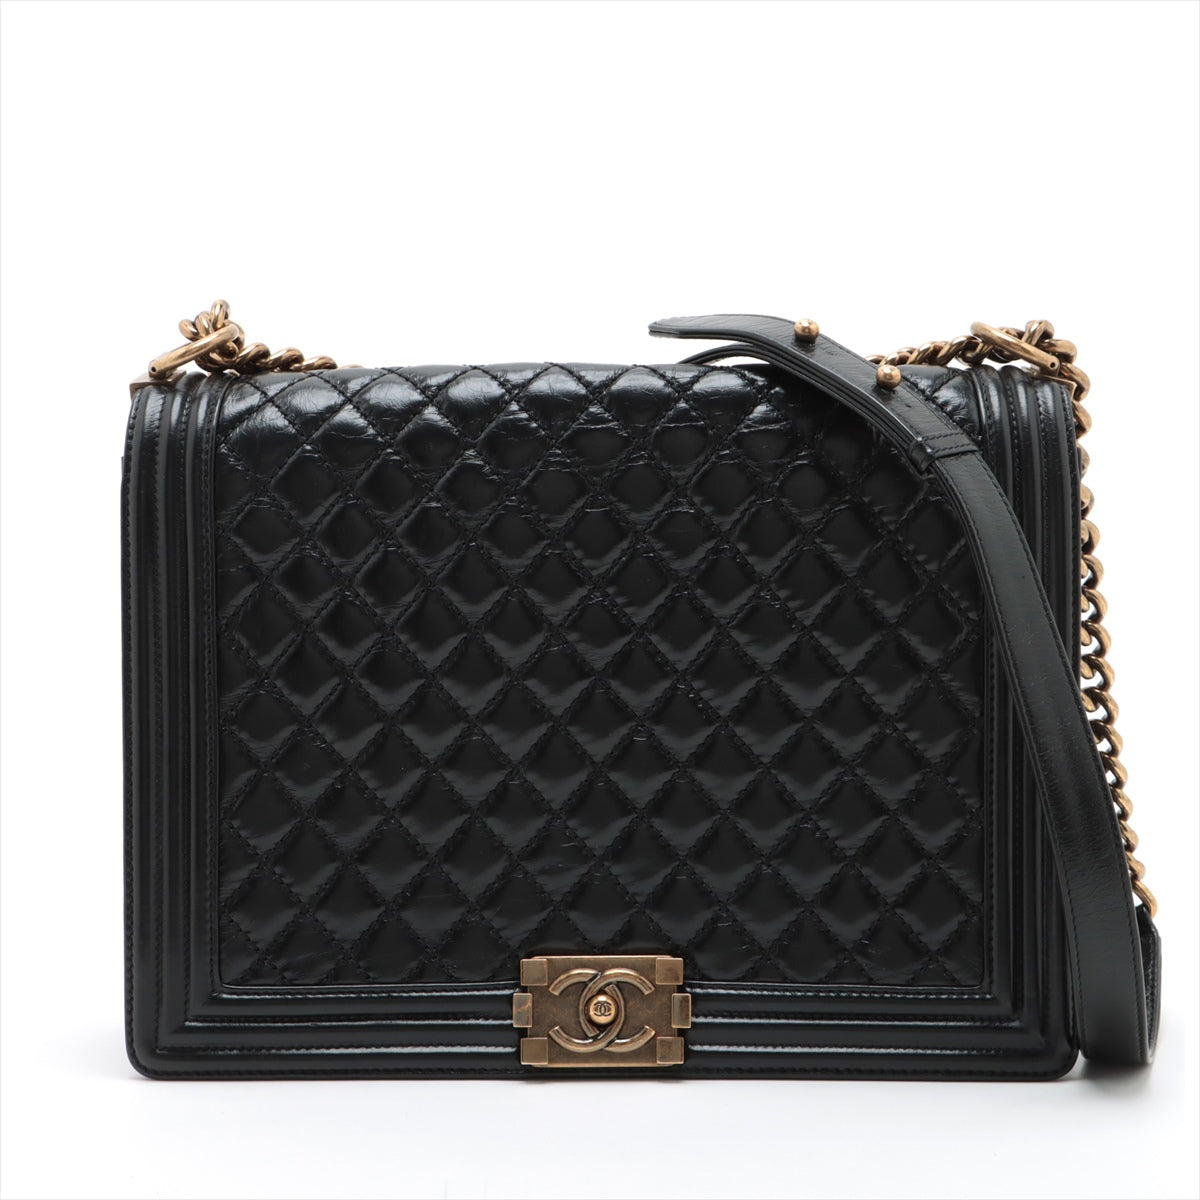 Chanel Boy Chanel Large Leather Chain shoulder bag Black Gold Metal fittings 17XXXXXX A67087